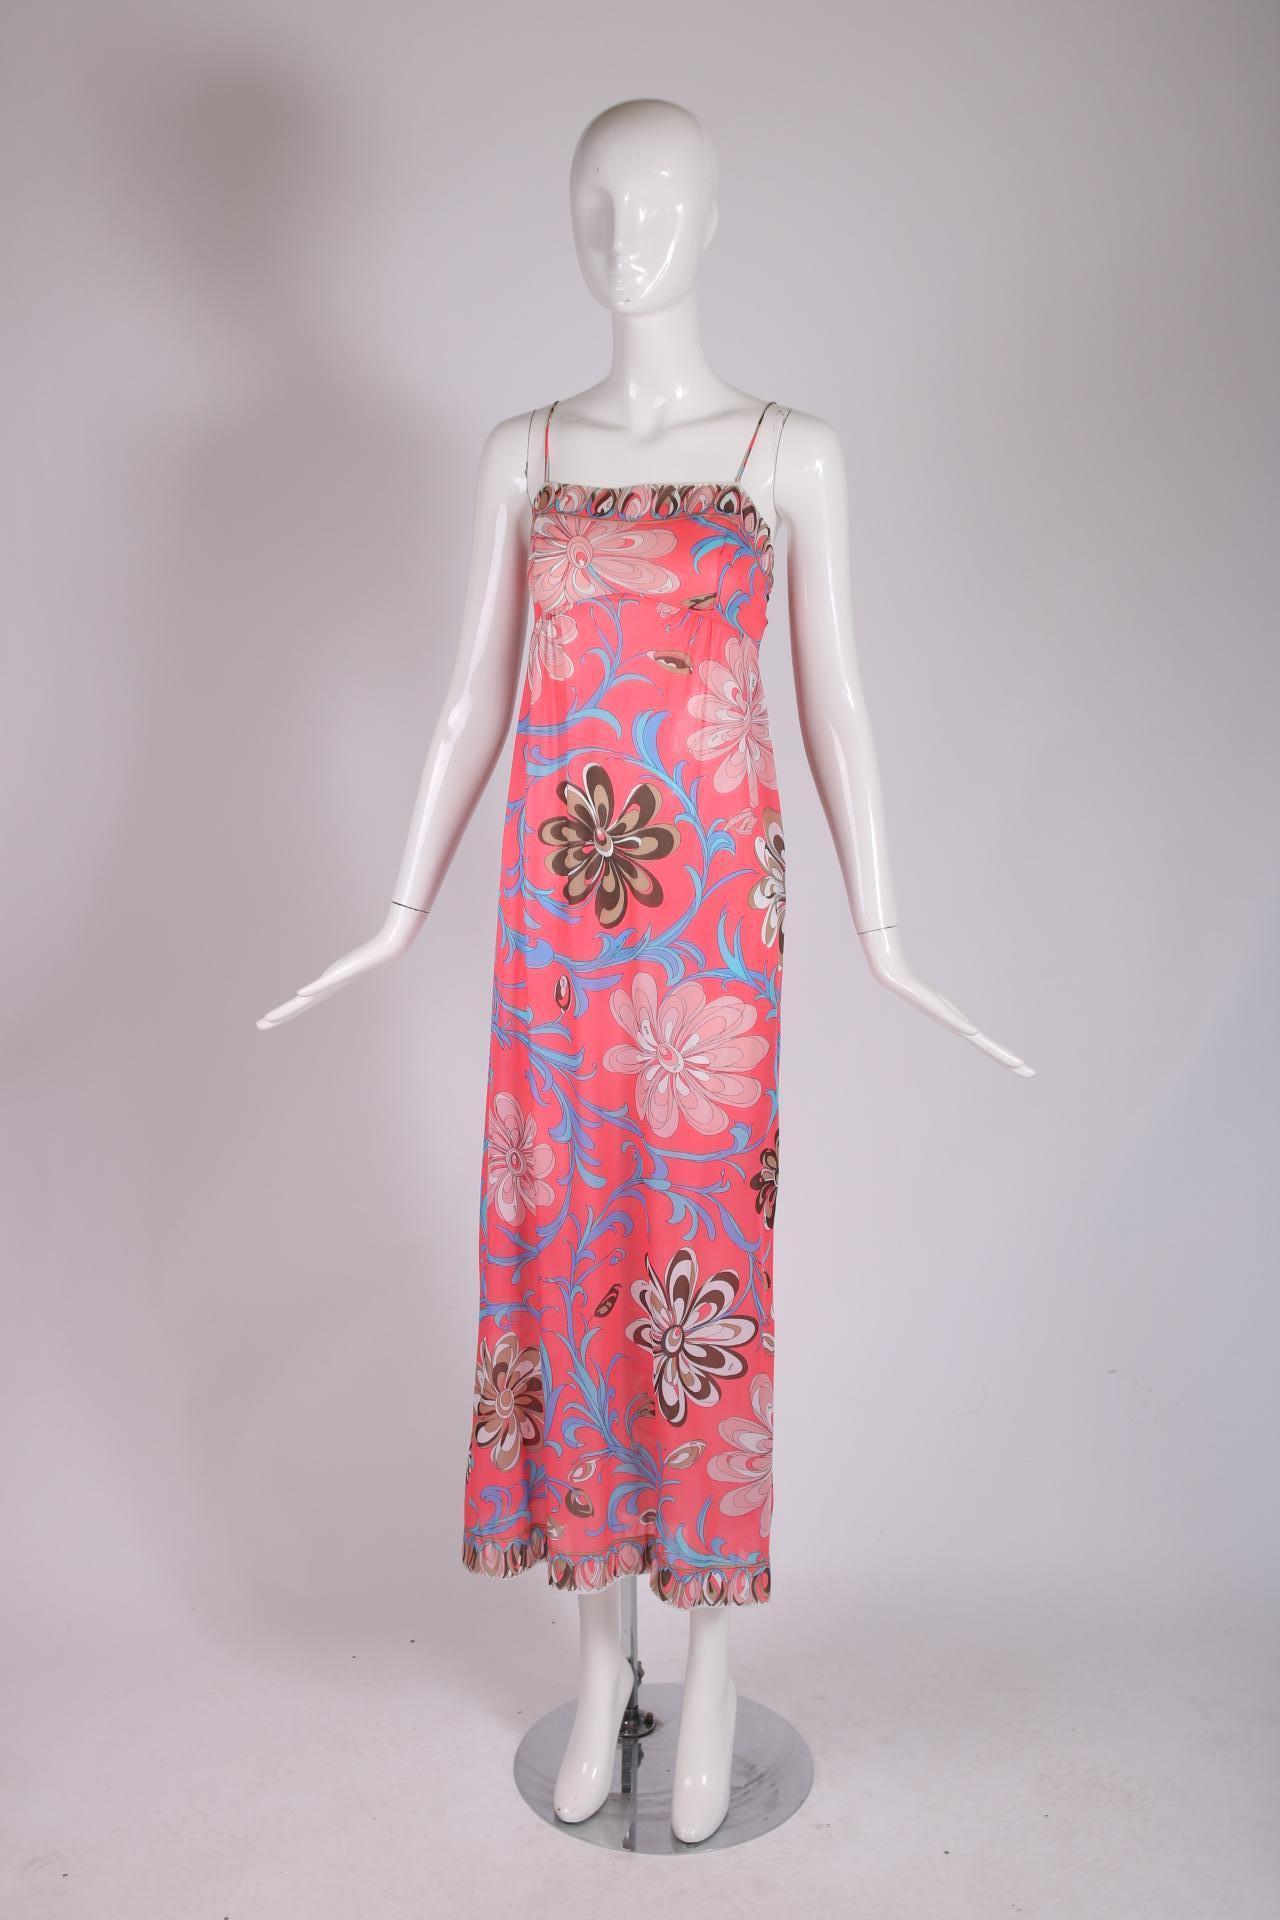 1970's Pucci for Formfit Rogers signature floral printed maxi slip dress in nylon with spaghetti straps and an empire waist. In excellent condition - size tag P. Please consult measurements.

Bust: 30